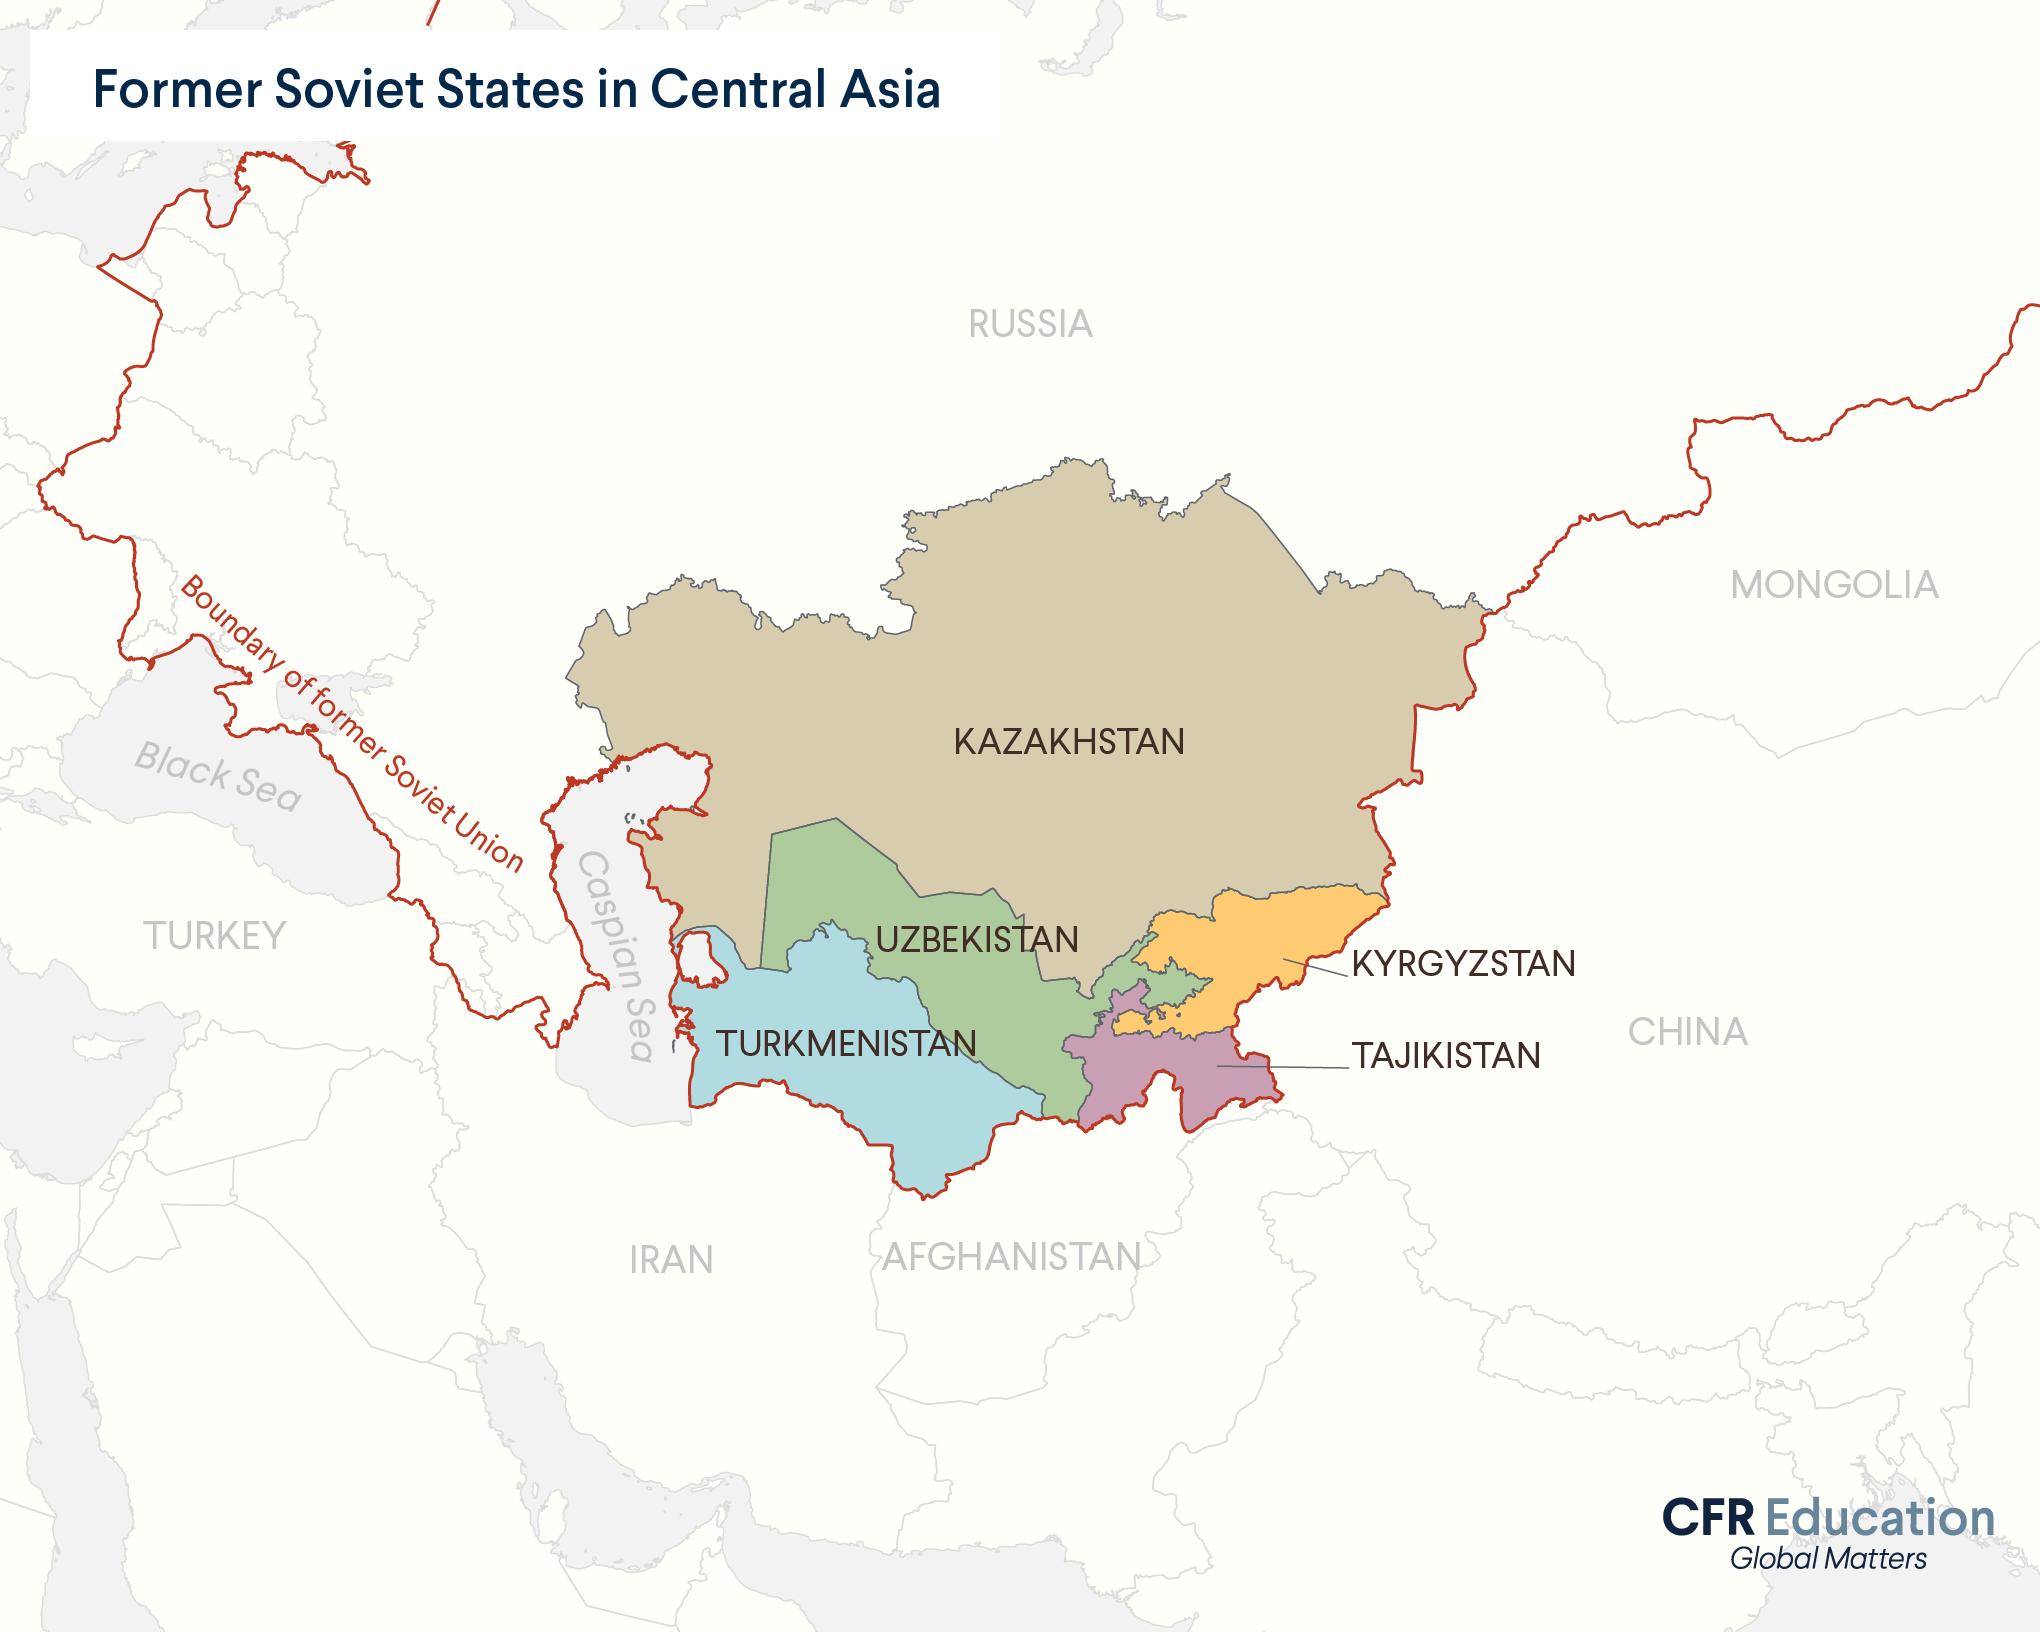 Map shows the former Soviet states in Central Asia: Kazakhstan, Turkmenistan, Uzbekistan, Tajikistan, and Kyrgyzstan. For more info contact us at cfr_education@cfr.org.